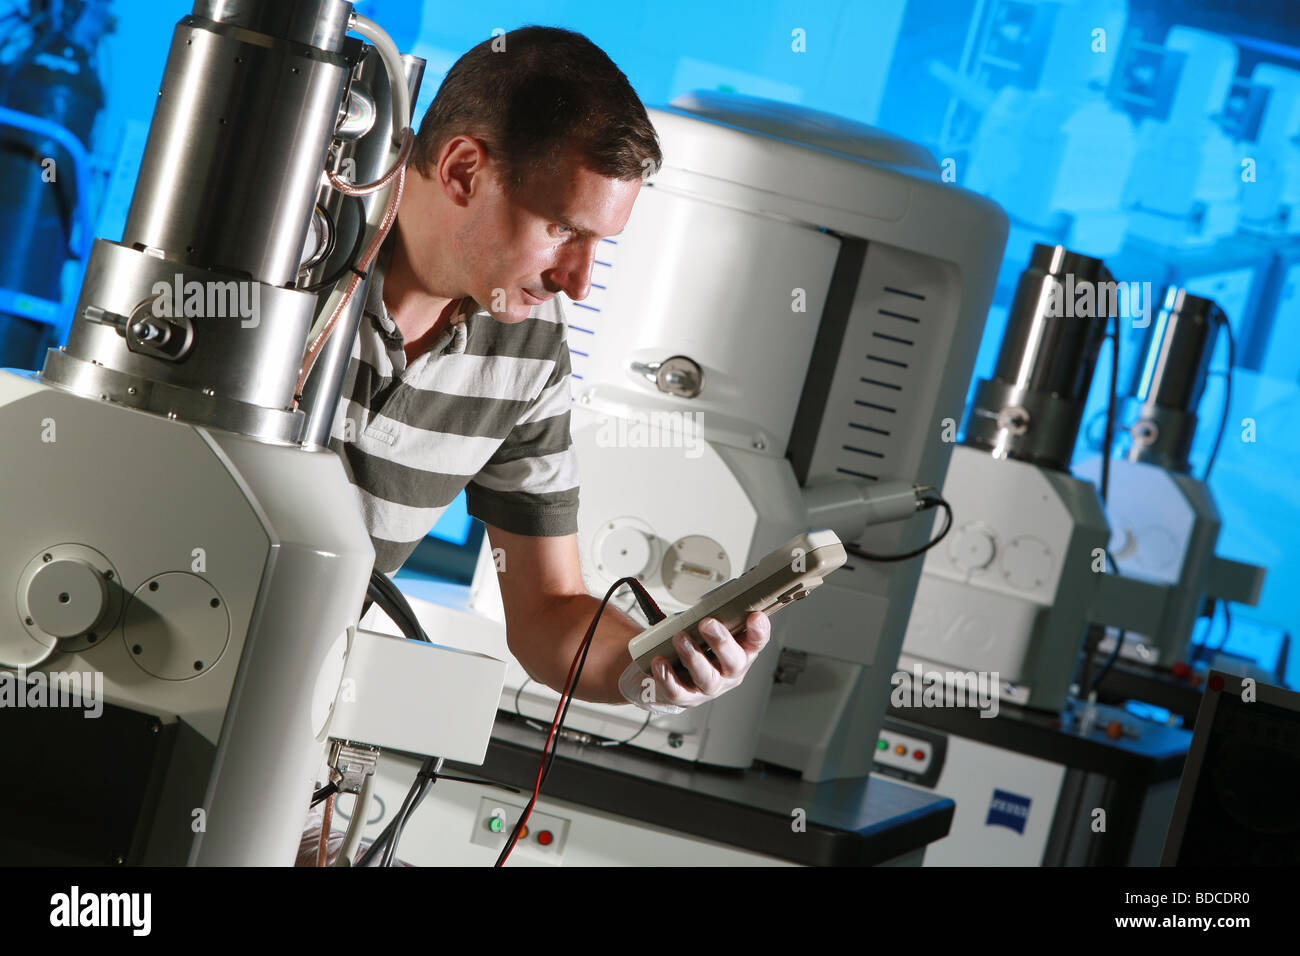 Electronics engineer working in a factory Stock Photo